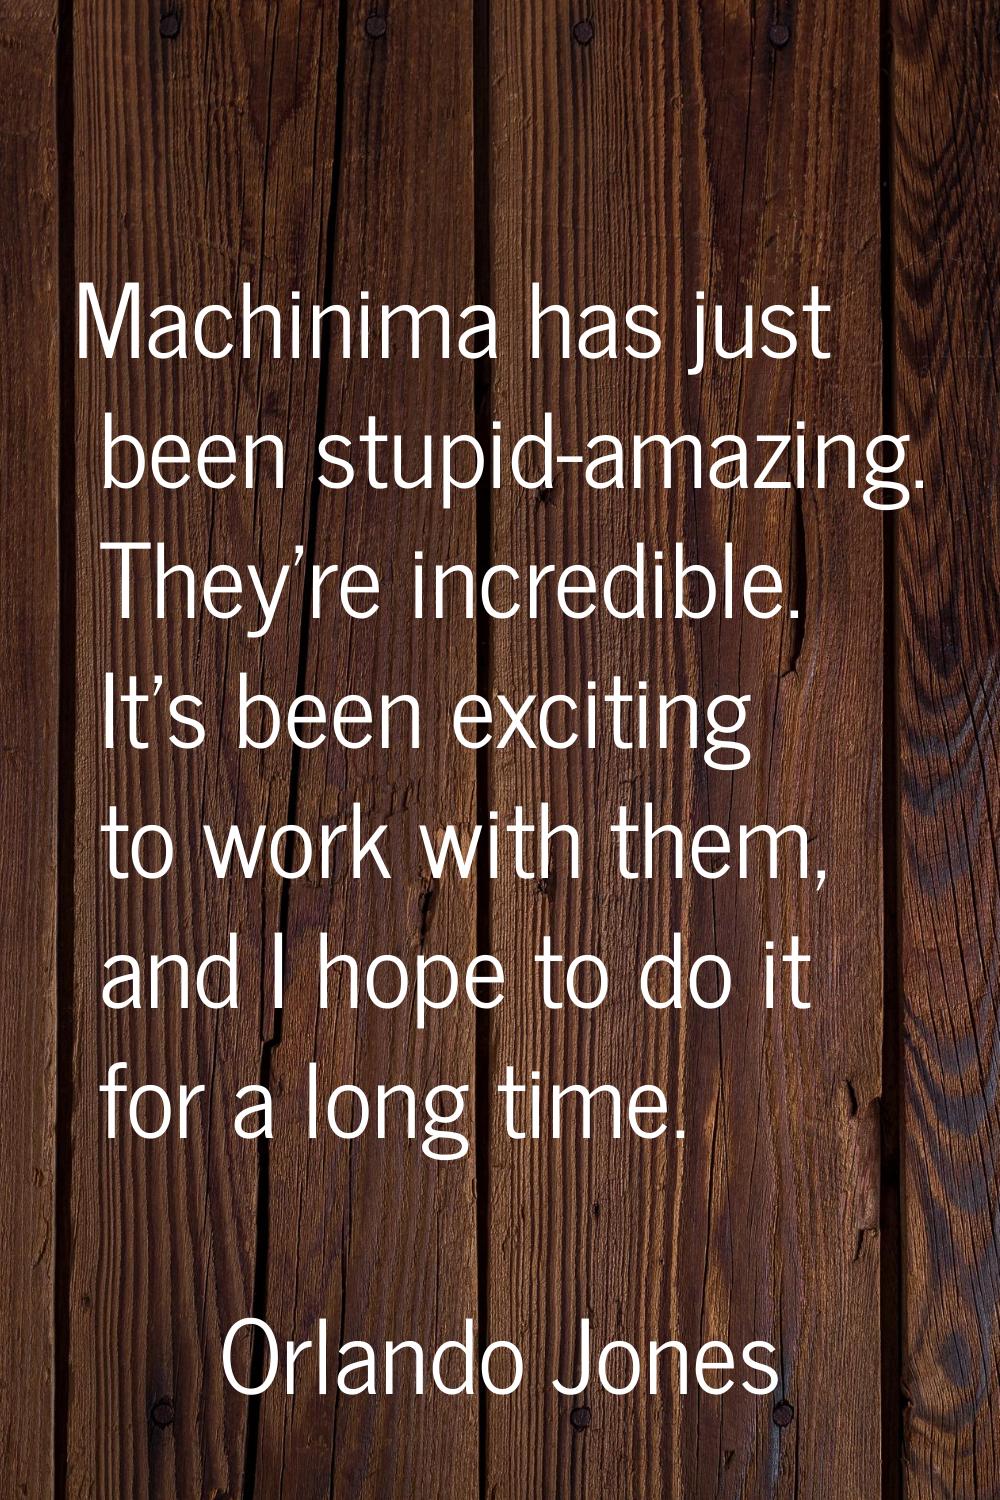 Machinima has just been stupid-amazing. They're incredible. It's been exciting to work with them, a